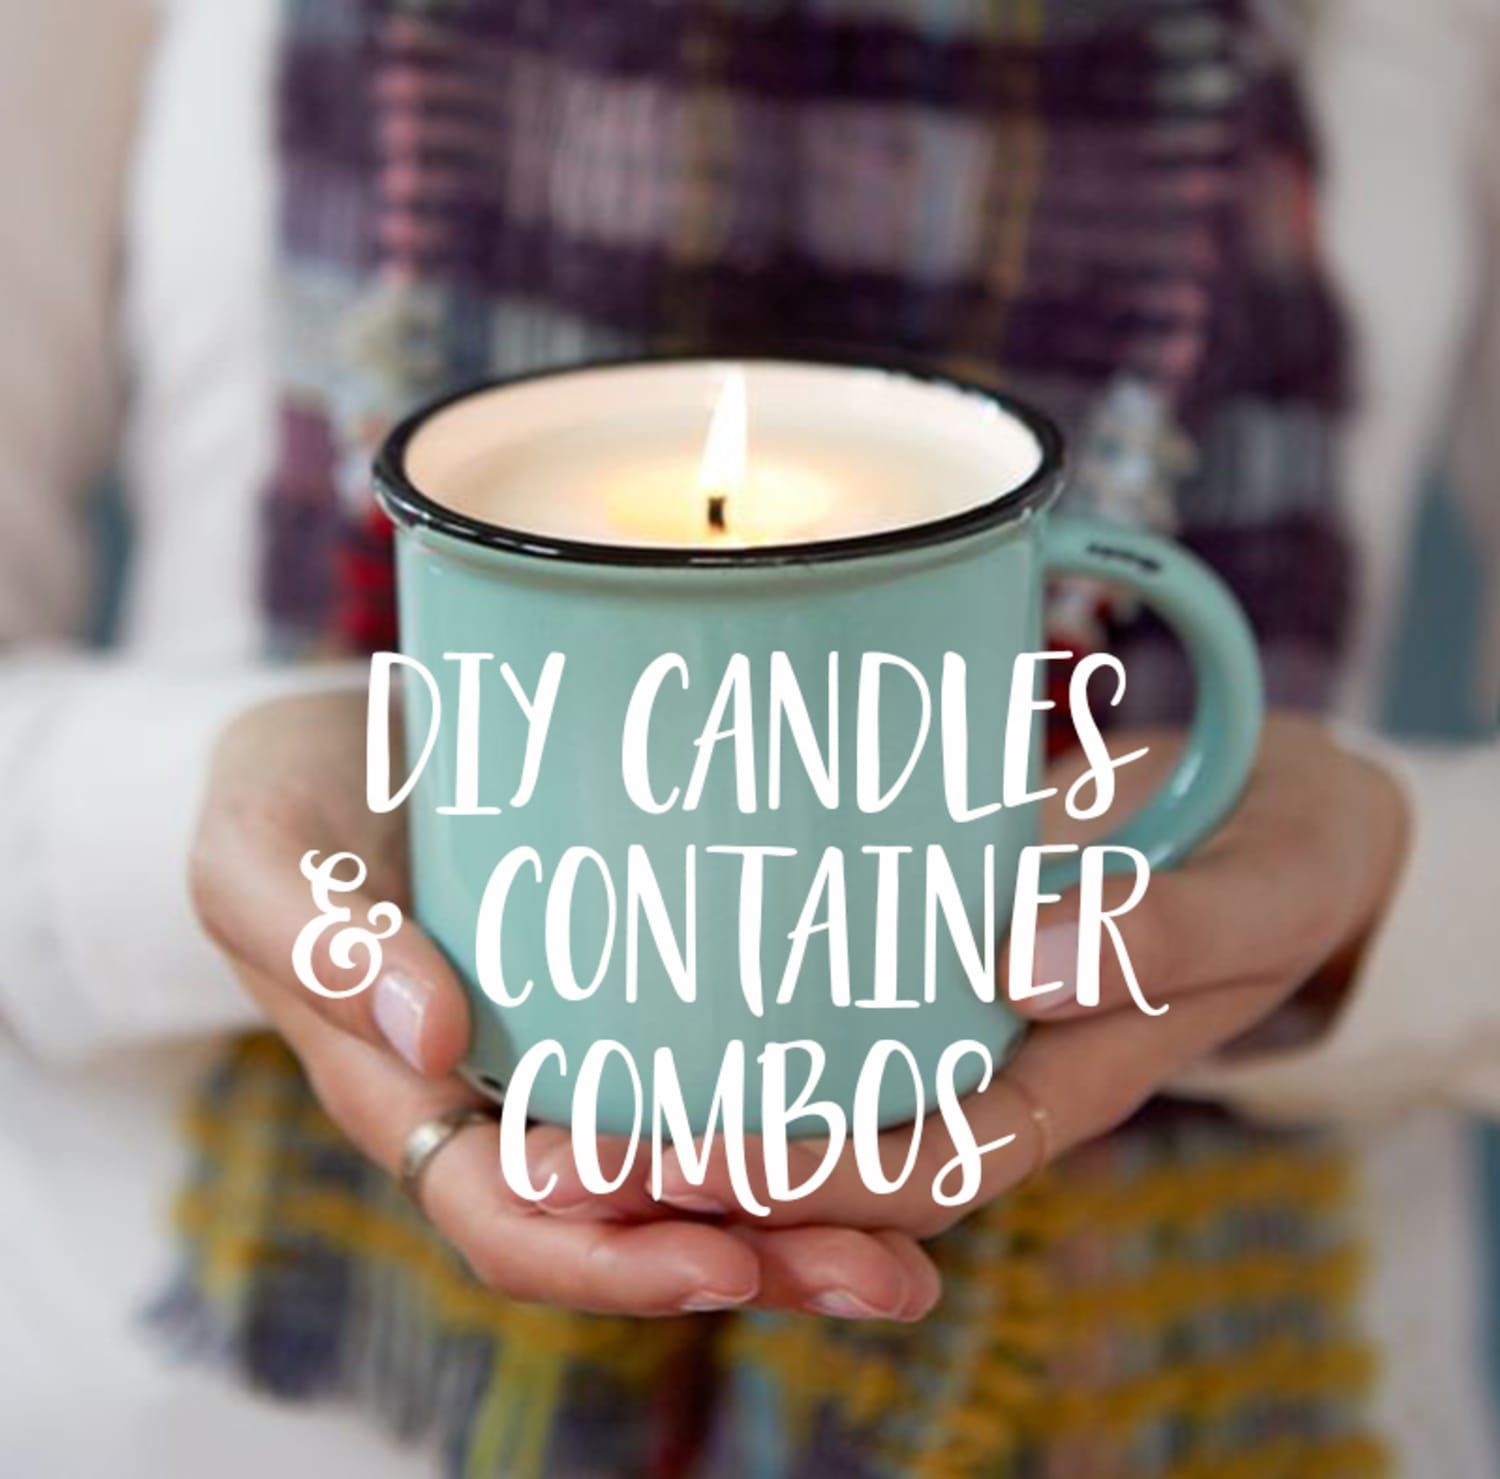 Your New Winter Hobby: Custom Candle & Container Combos - Your New Winter Hobby: Custom Candle & Container Combos -   14 diy Candles containers ideas